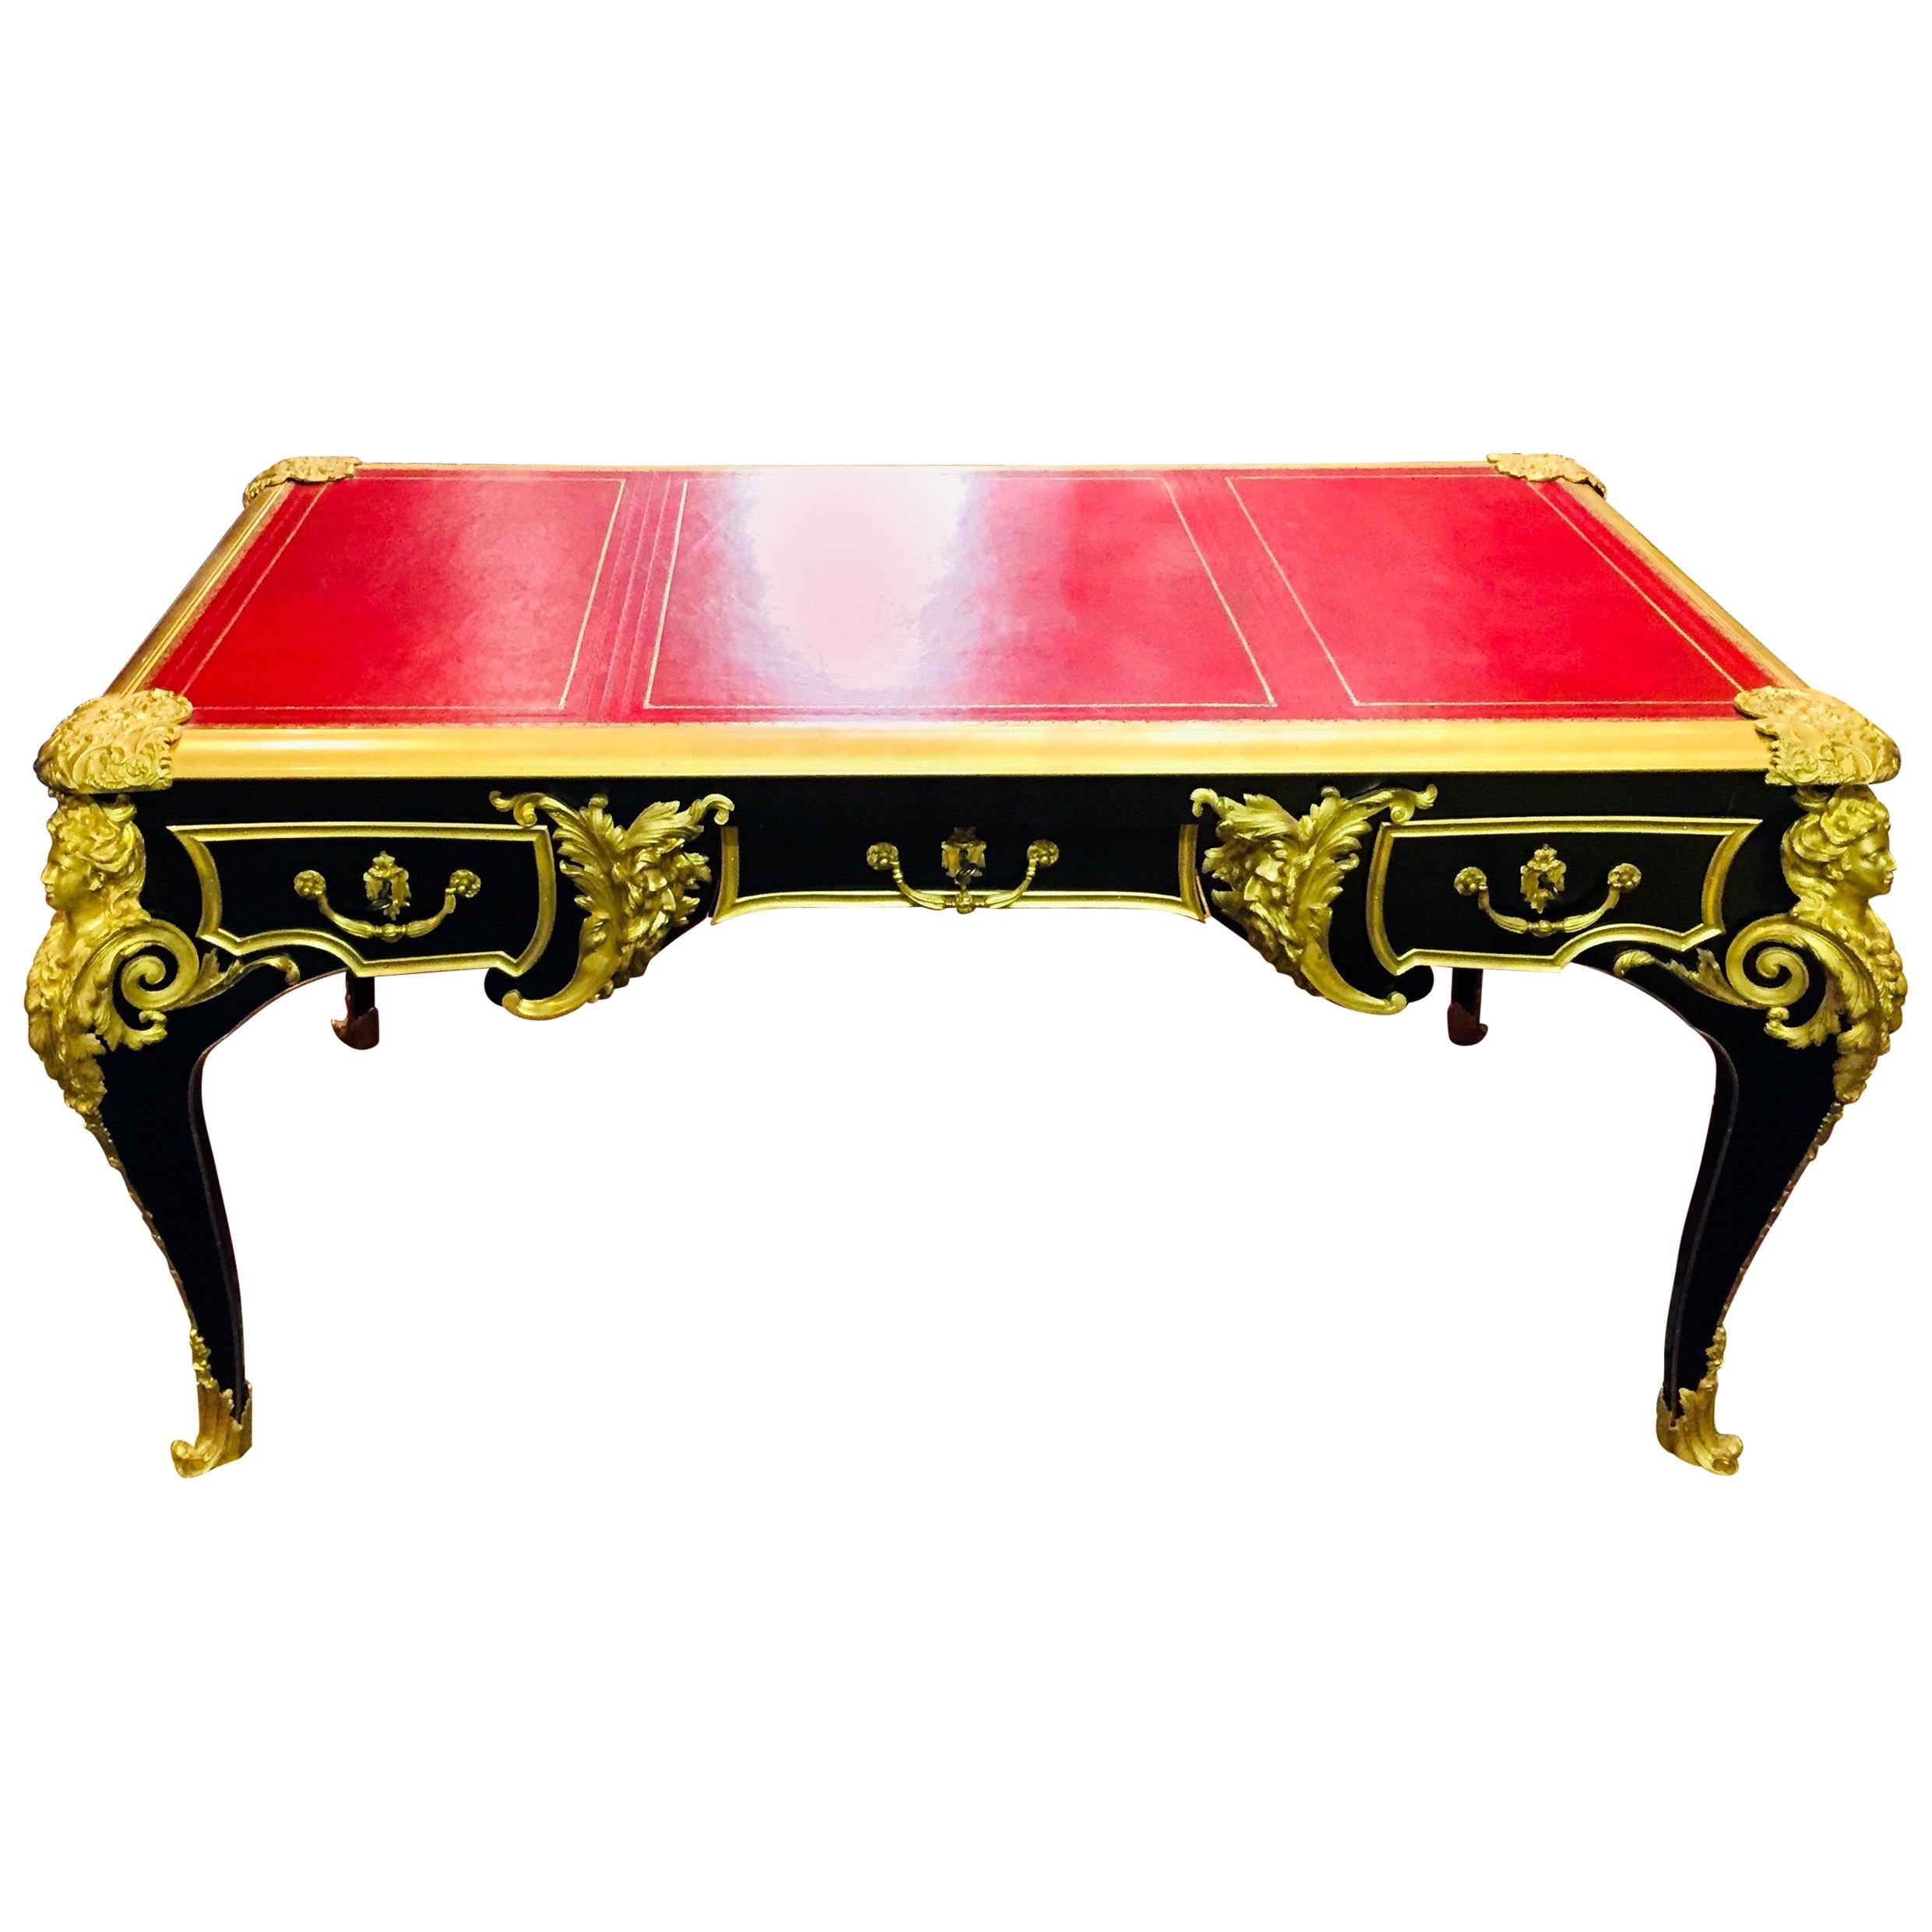 20th Century Bureau Plat or Writting Table by the Model of Andre Charles Boulle